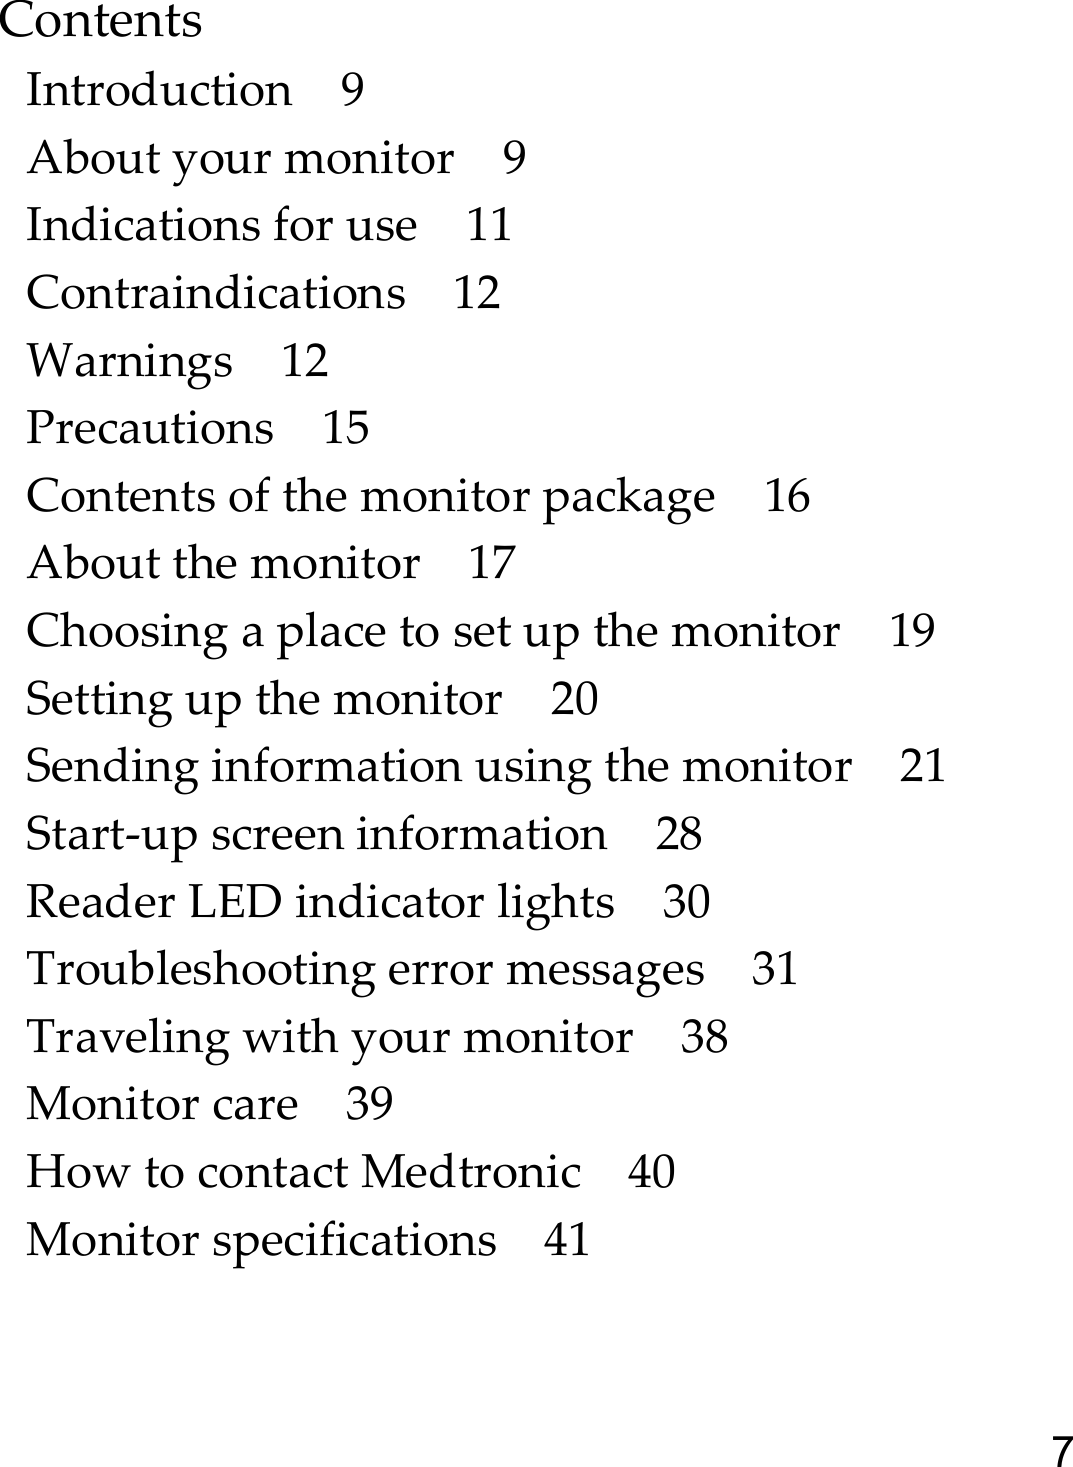 7ContentsIntroduction 9About your monitor 9Indications for use 11Contraindications 12Warnings 12Precautions 15Contents of the monitor package 16About the monitor 17Choosing a place to set up the monitor 19Setting up the monitor 20Sending information using the monitor 21Start-up screen information 28Reader LED indicator lights 30Troubleshooting error messages 31Traveling with your monitor 38Monitor care 39How to contact Medtronic 40Monitor specifications 41